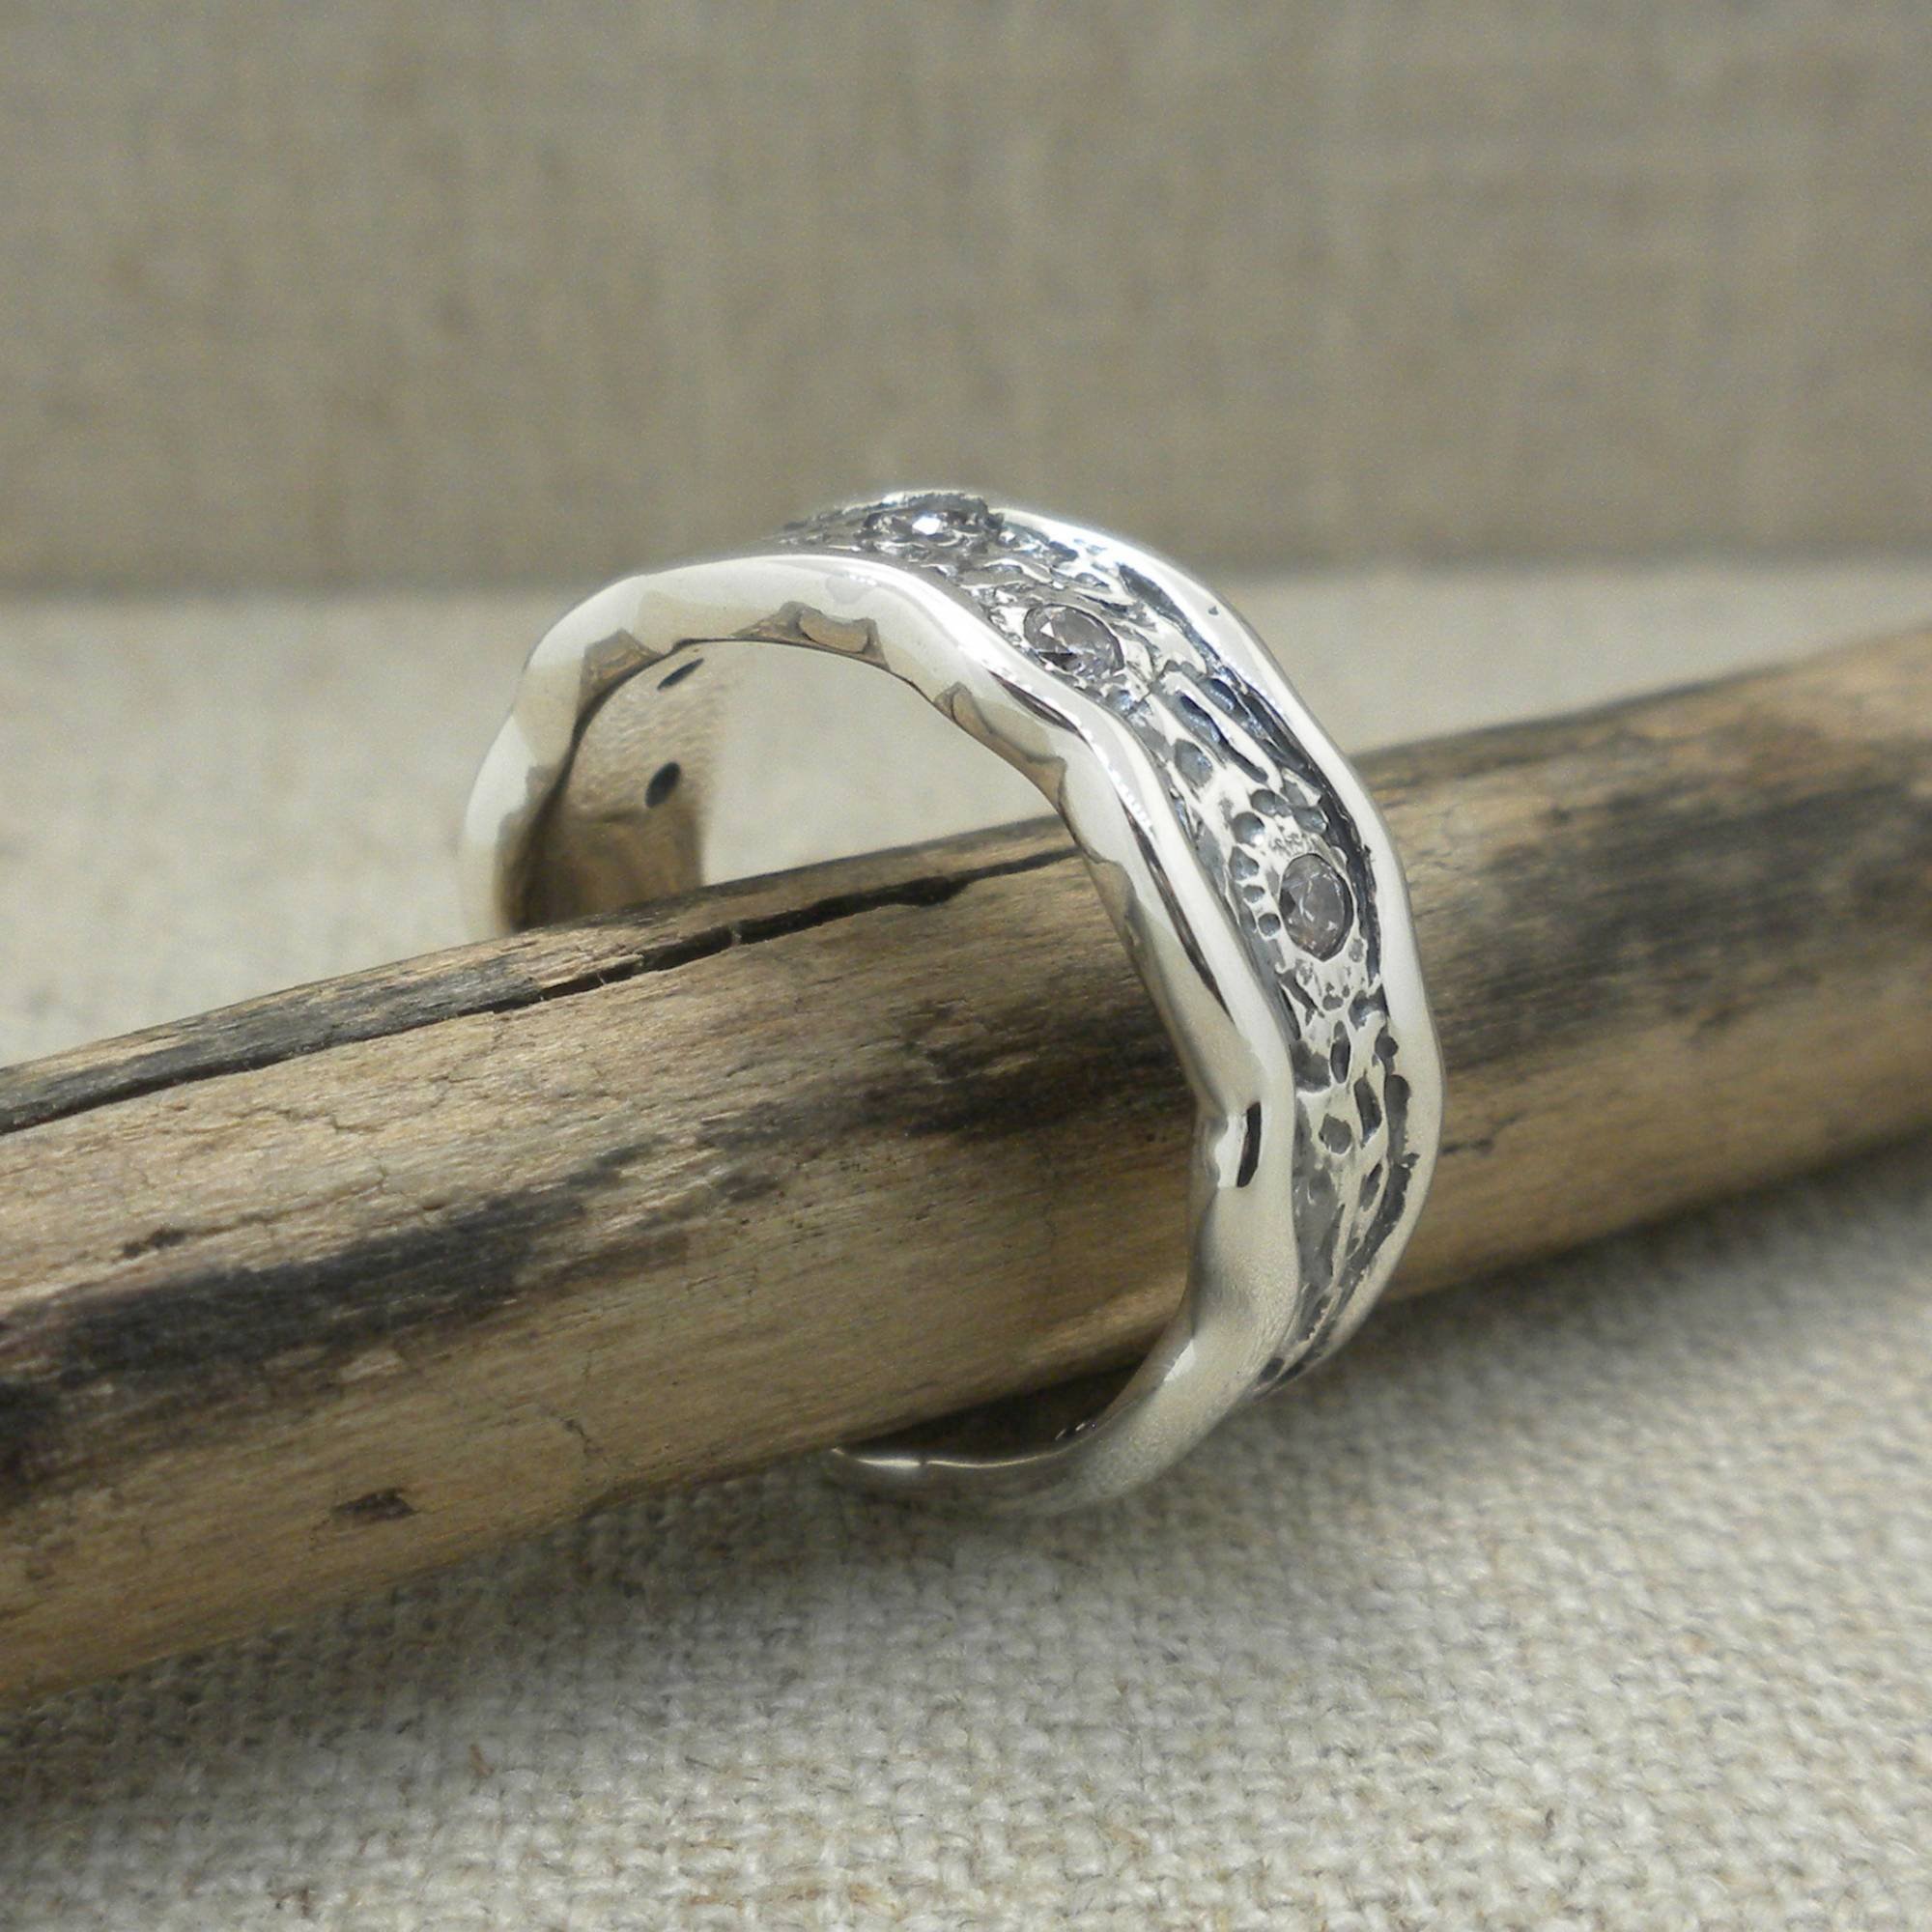 Sterling Silver with CZs Rocks 'N Rivers Wedding Band